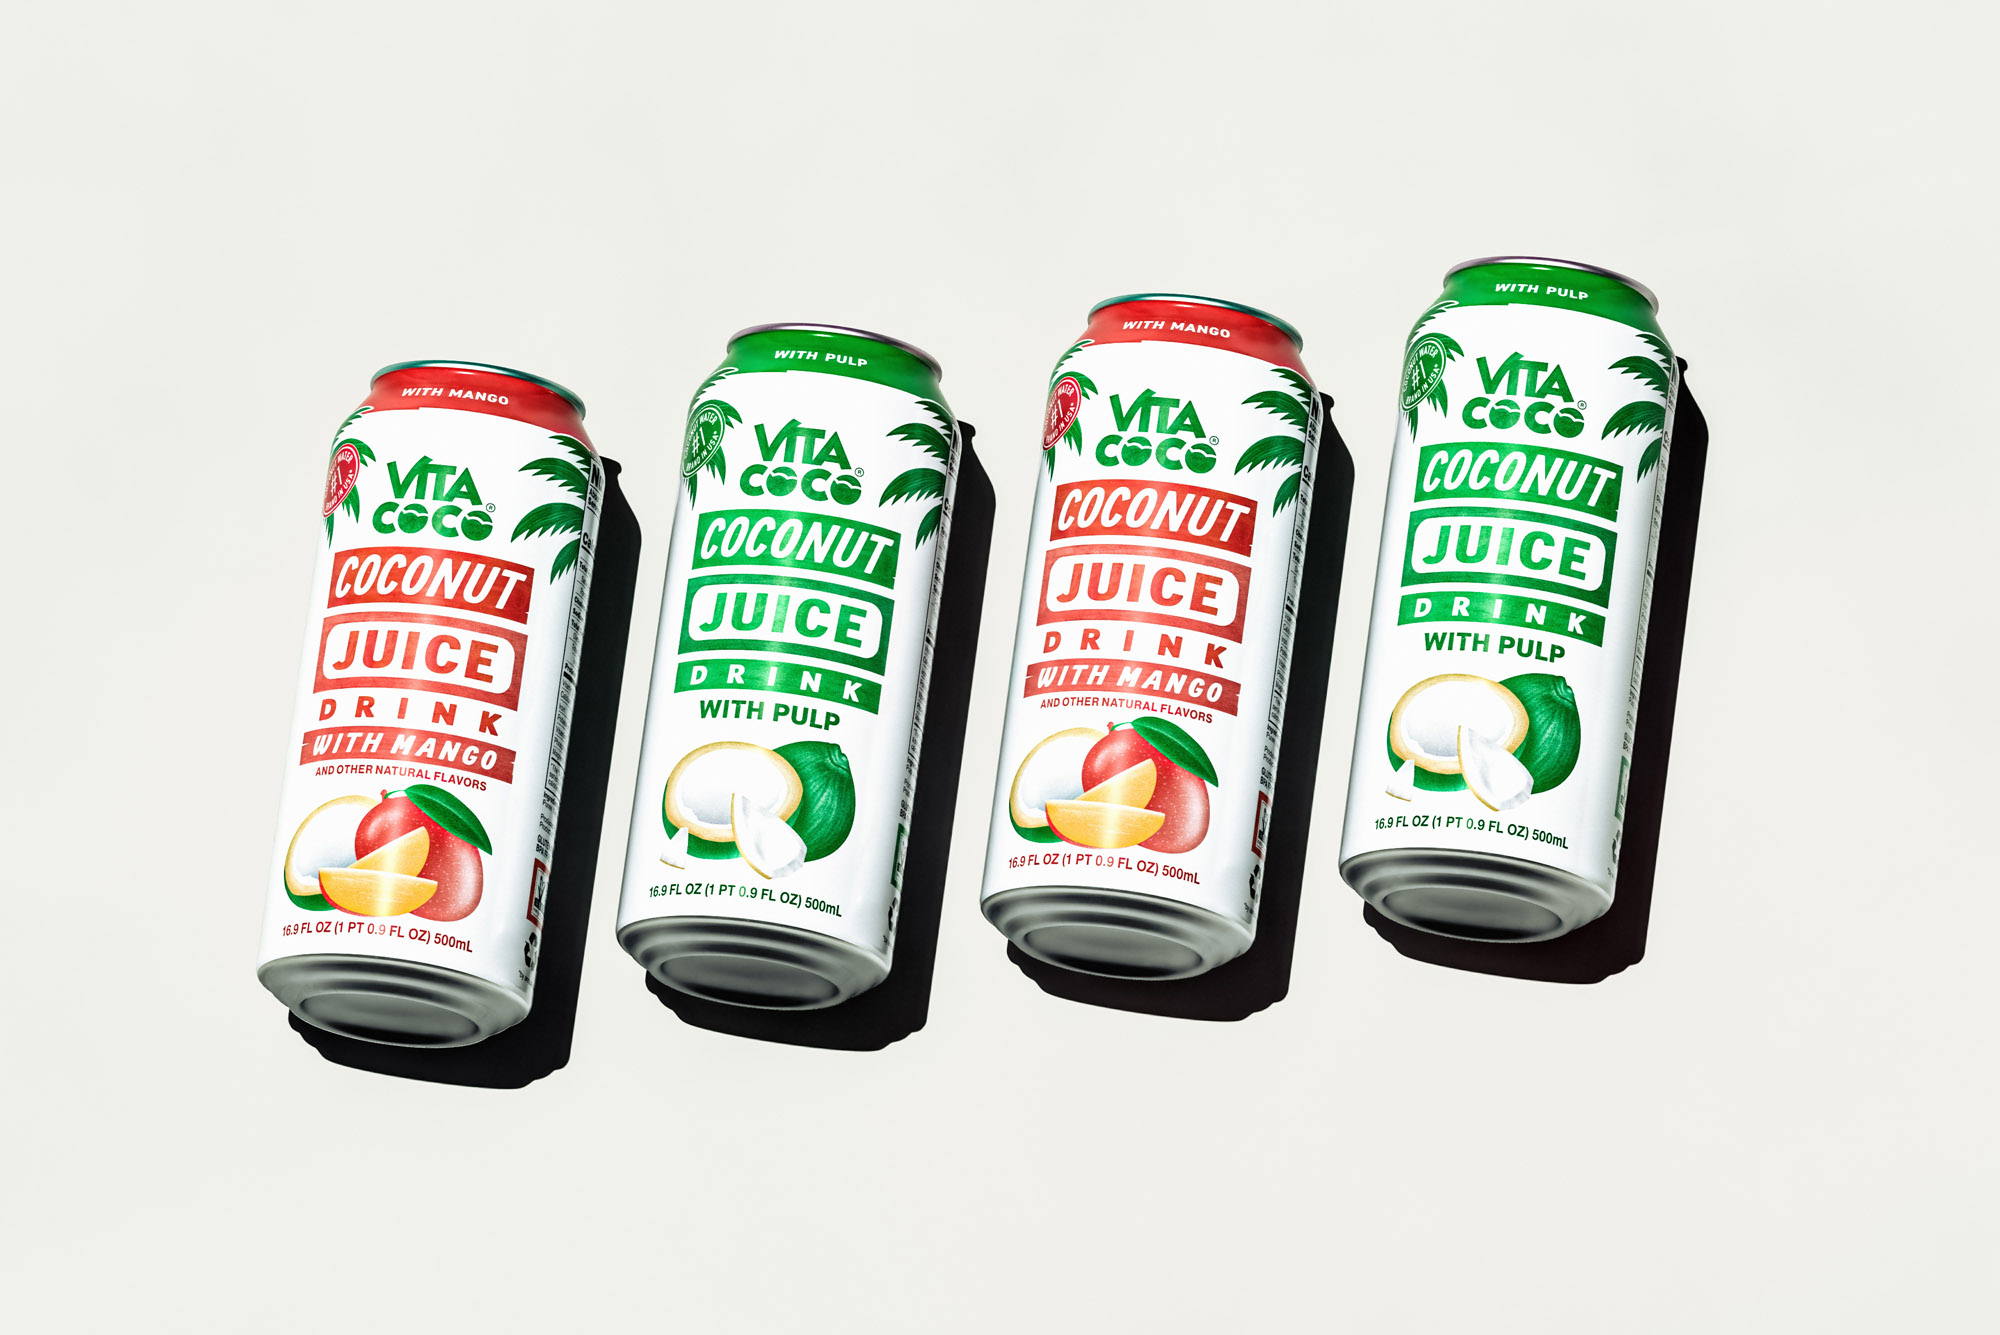 Vita Coco Juice Packaging Design by Nessen Co